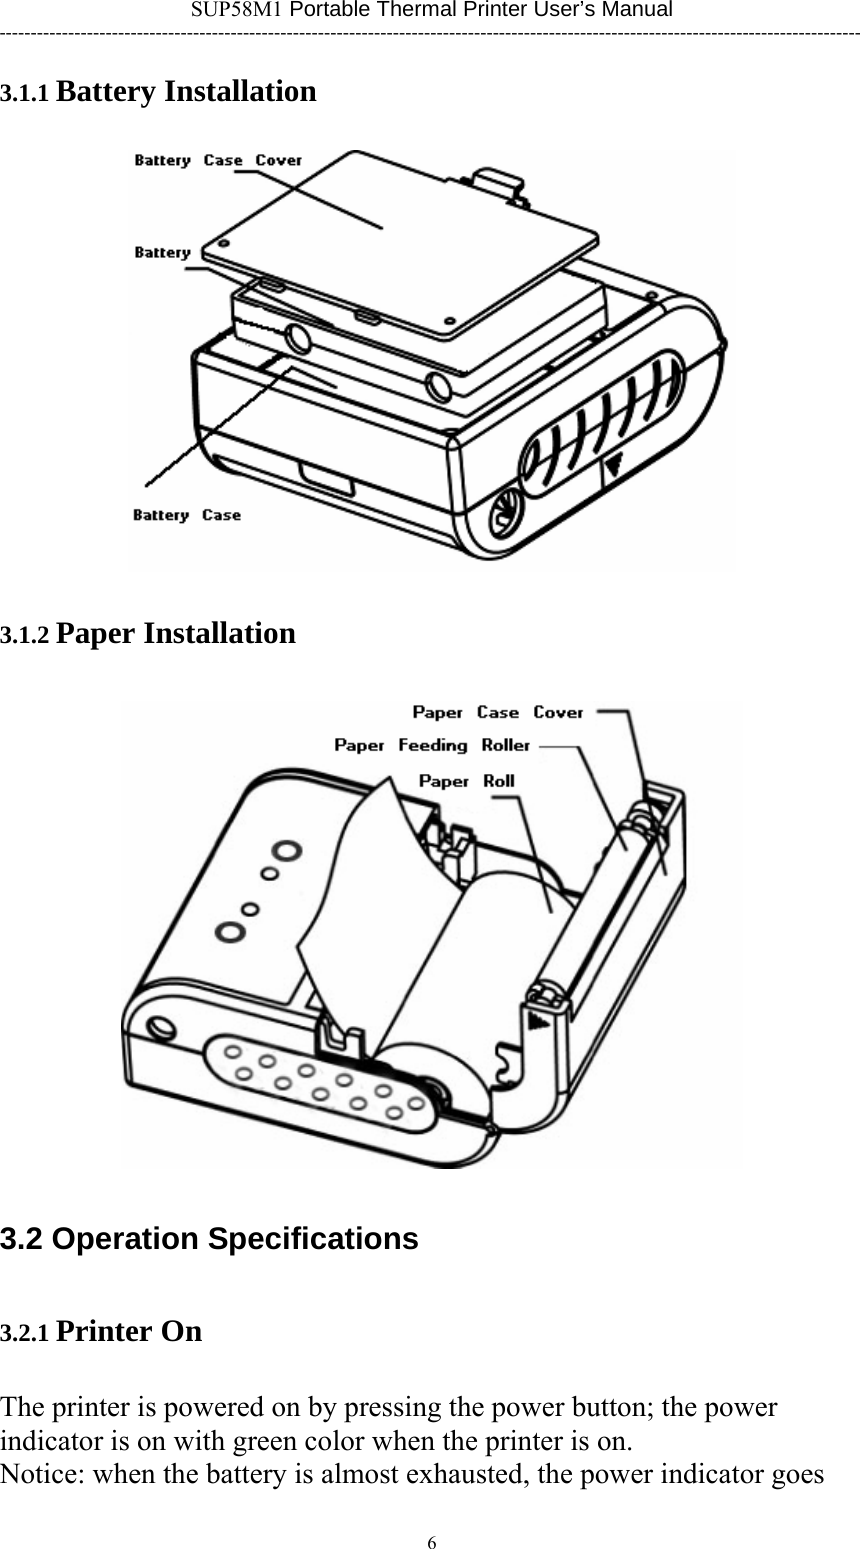 SUP58M1 Portable Thermal Printer User’s Manual ------------------------------------------------------------------------------------------------------------------------------------------ 3.1.1 Battery Installation  3.1.2 Paper Installation  3.2 Operation Specifications 3.2.1 Printer On The printer is powered on by pressing the power button; the power indicator is on with green color when the printer is on. Notice: when the battery is almost exhausted, the power indicator goes 6      